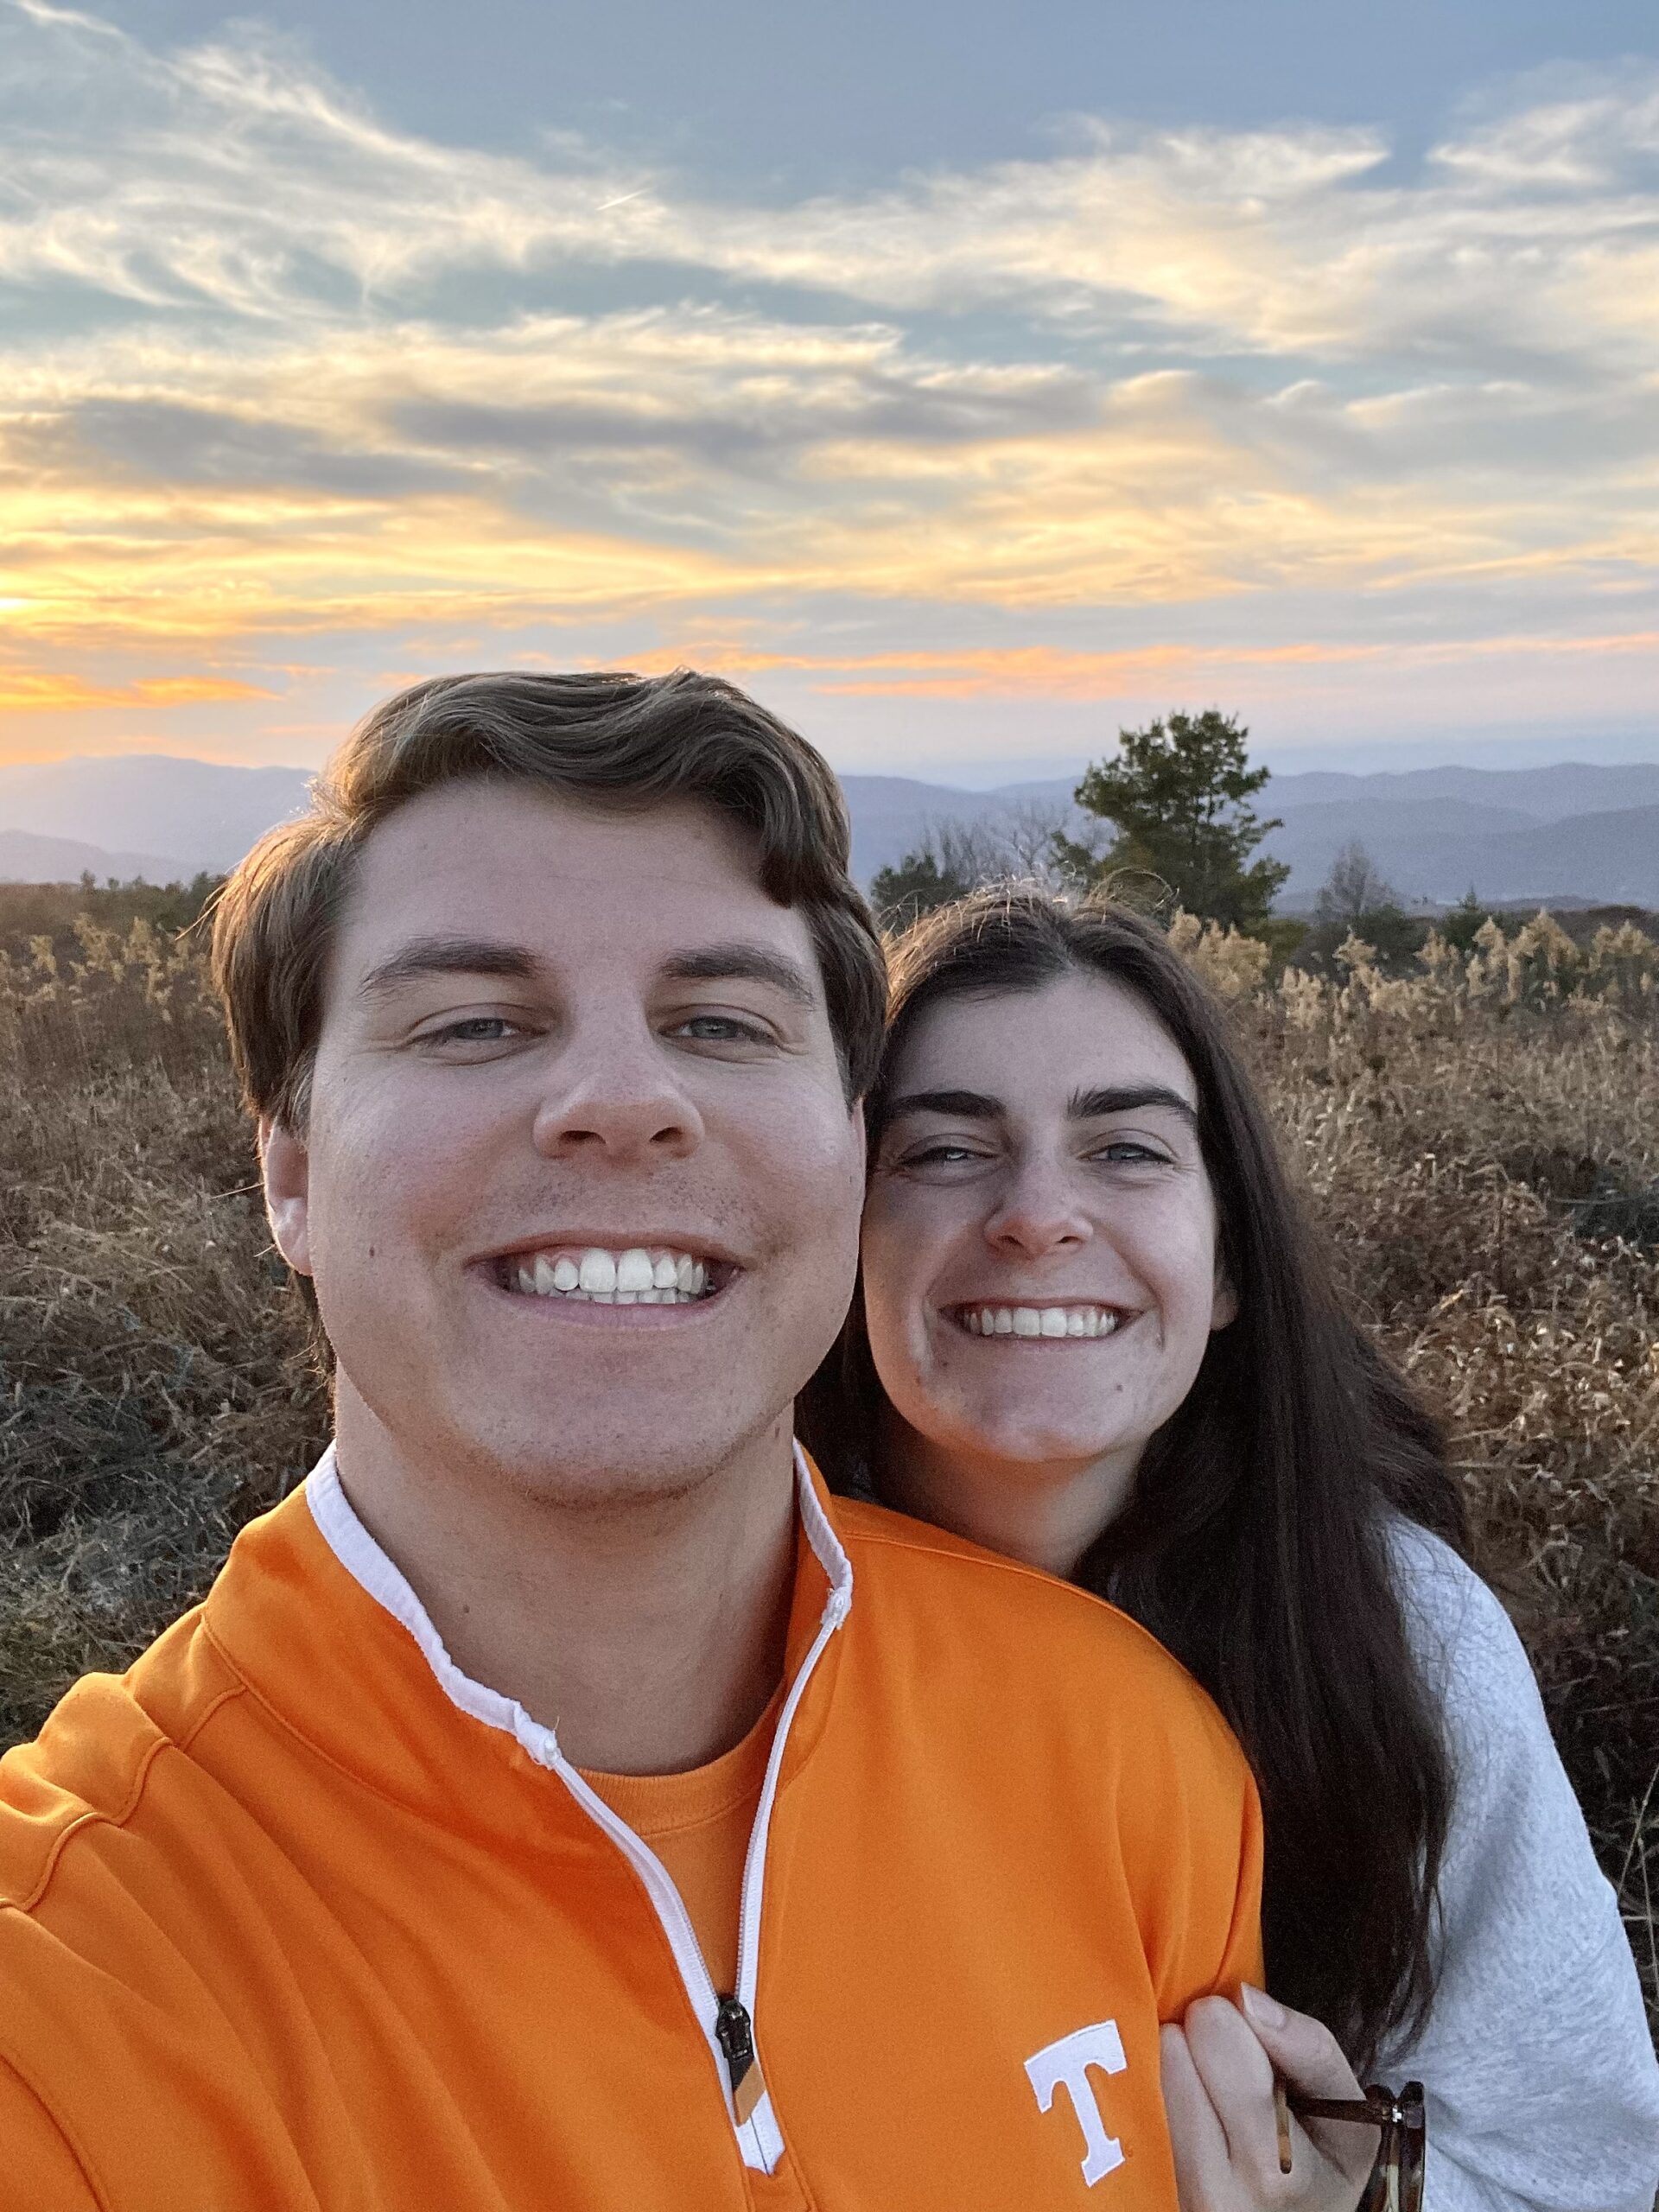 Photo of Jackson and Shelby. Both are fair skinned and have brown hair. Jackson is wearing an orange UT jacket, while Shelby is wearing a white jacket. They are posing on a mountain top with mountains in the background.